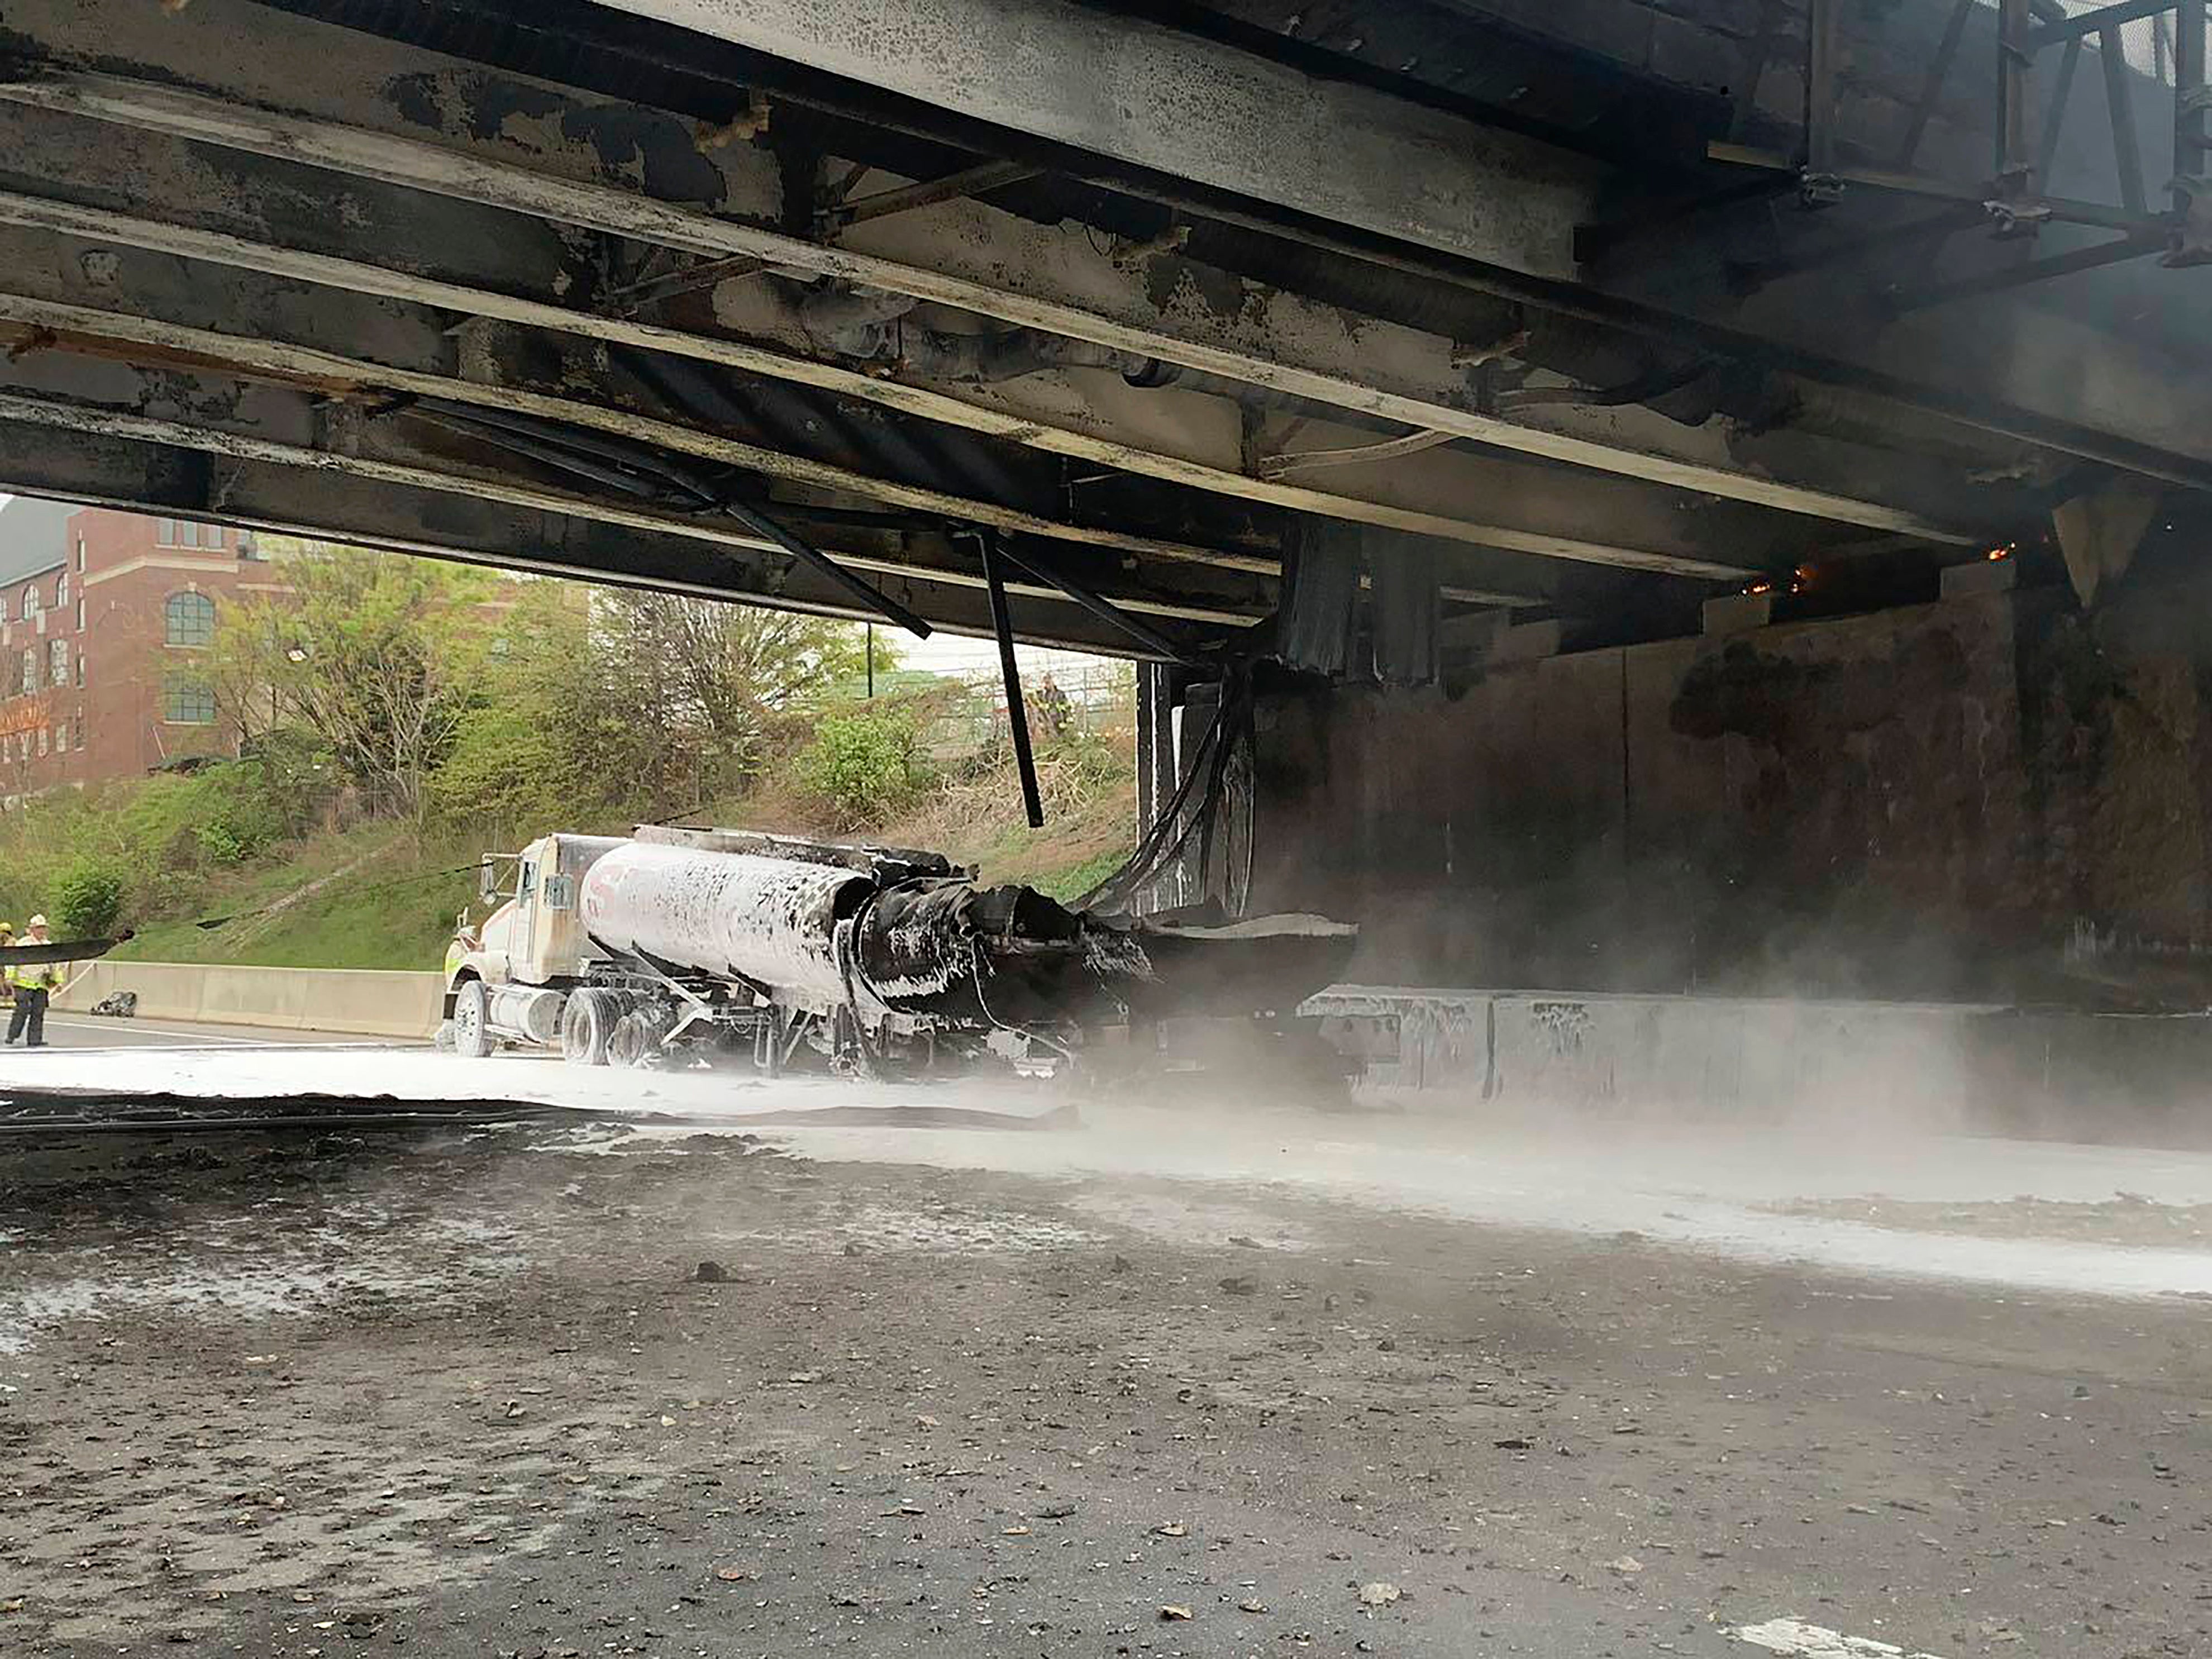 The scene of a tanker fire on I-95 in Norwalk, Connecticut